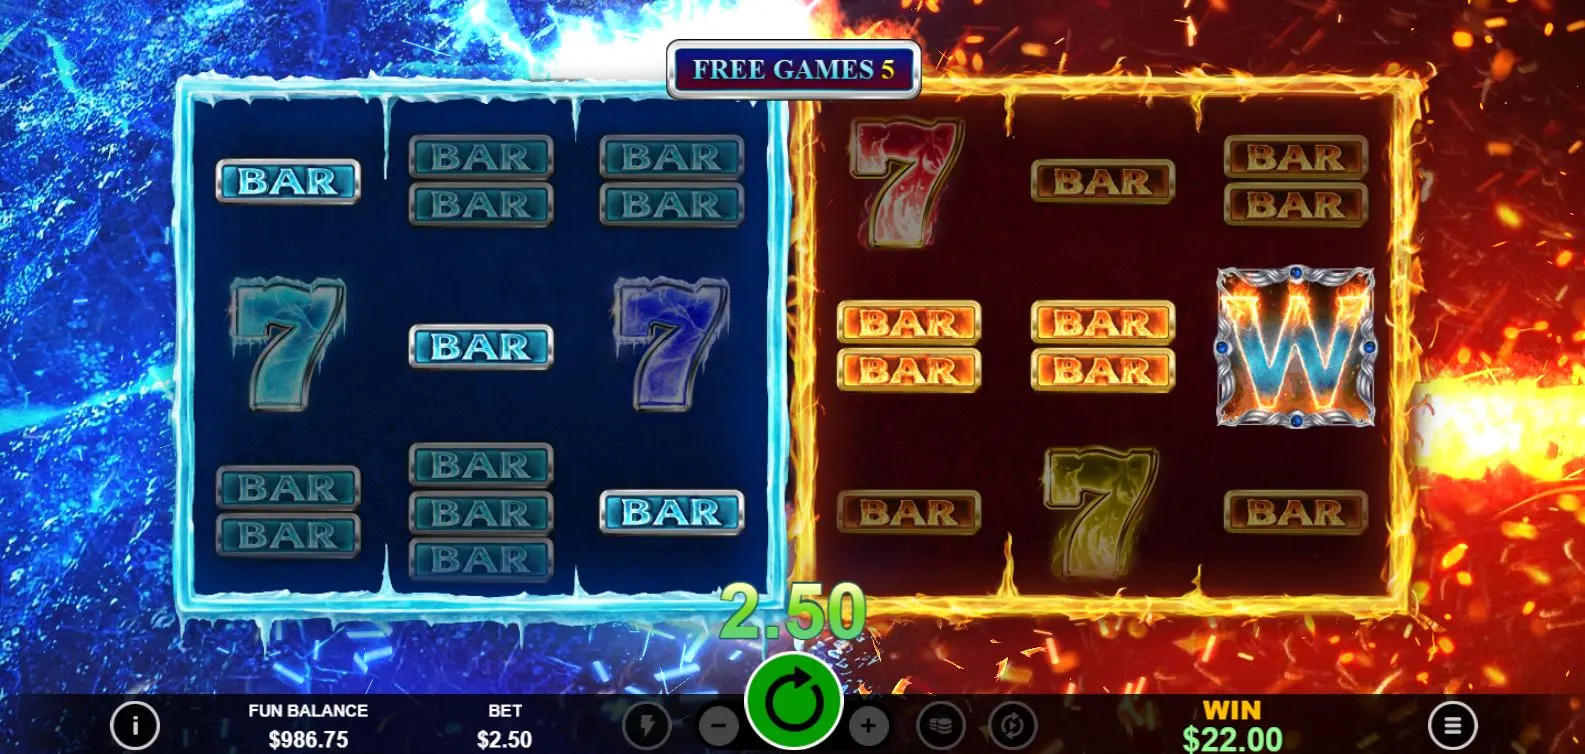 Icy Hot Multi-Game Free Games feature